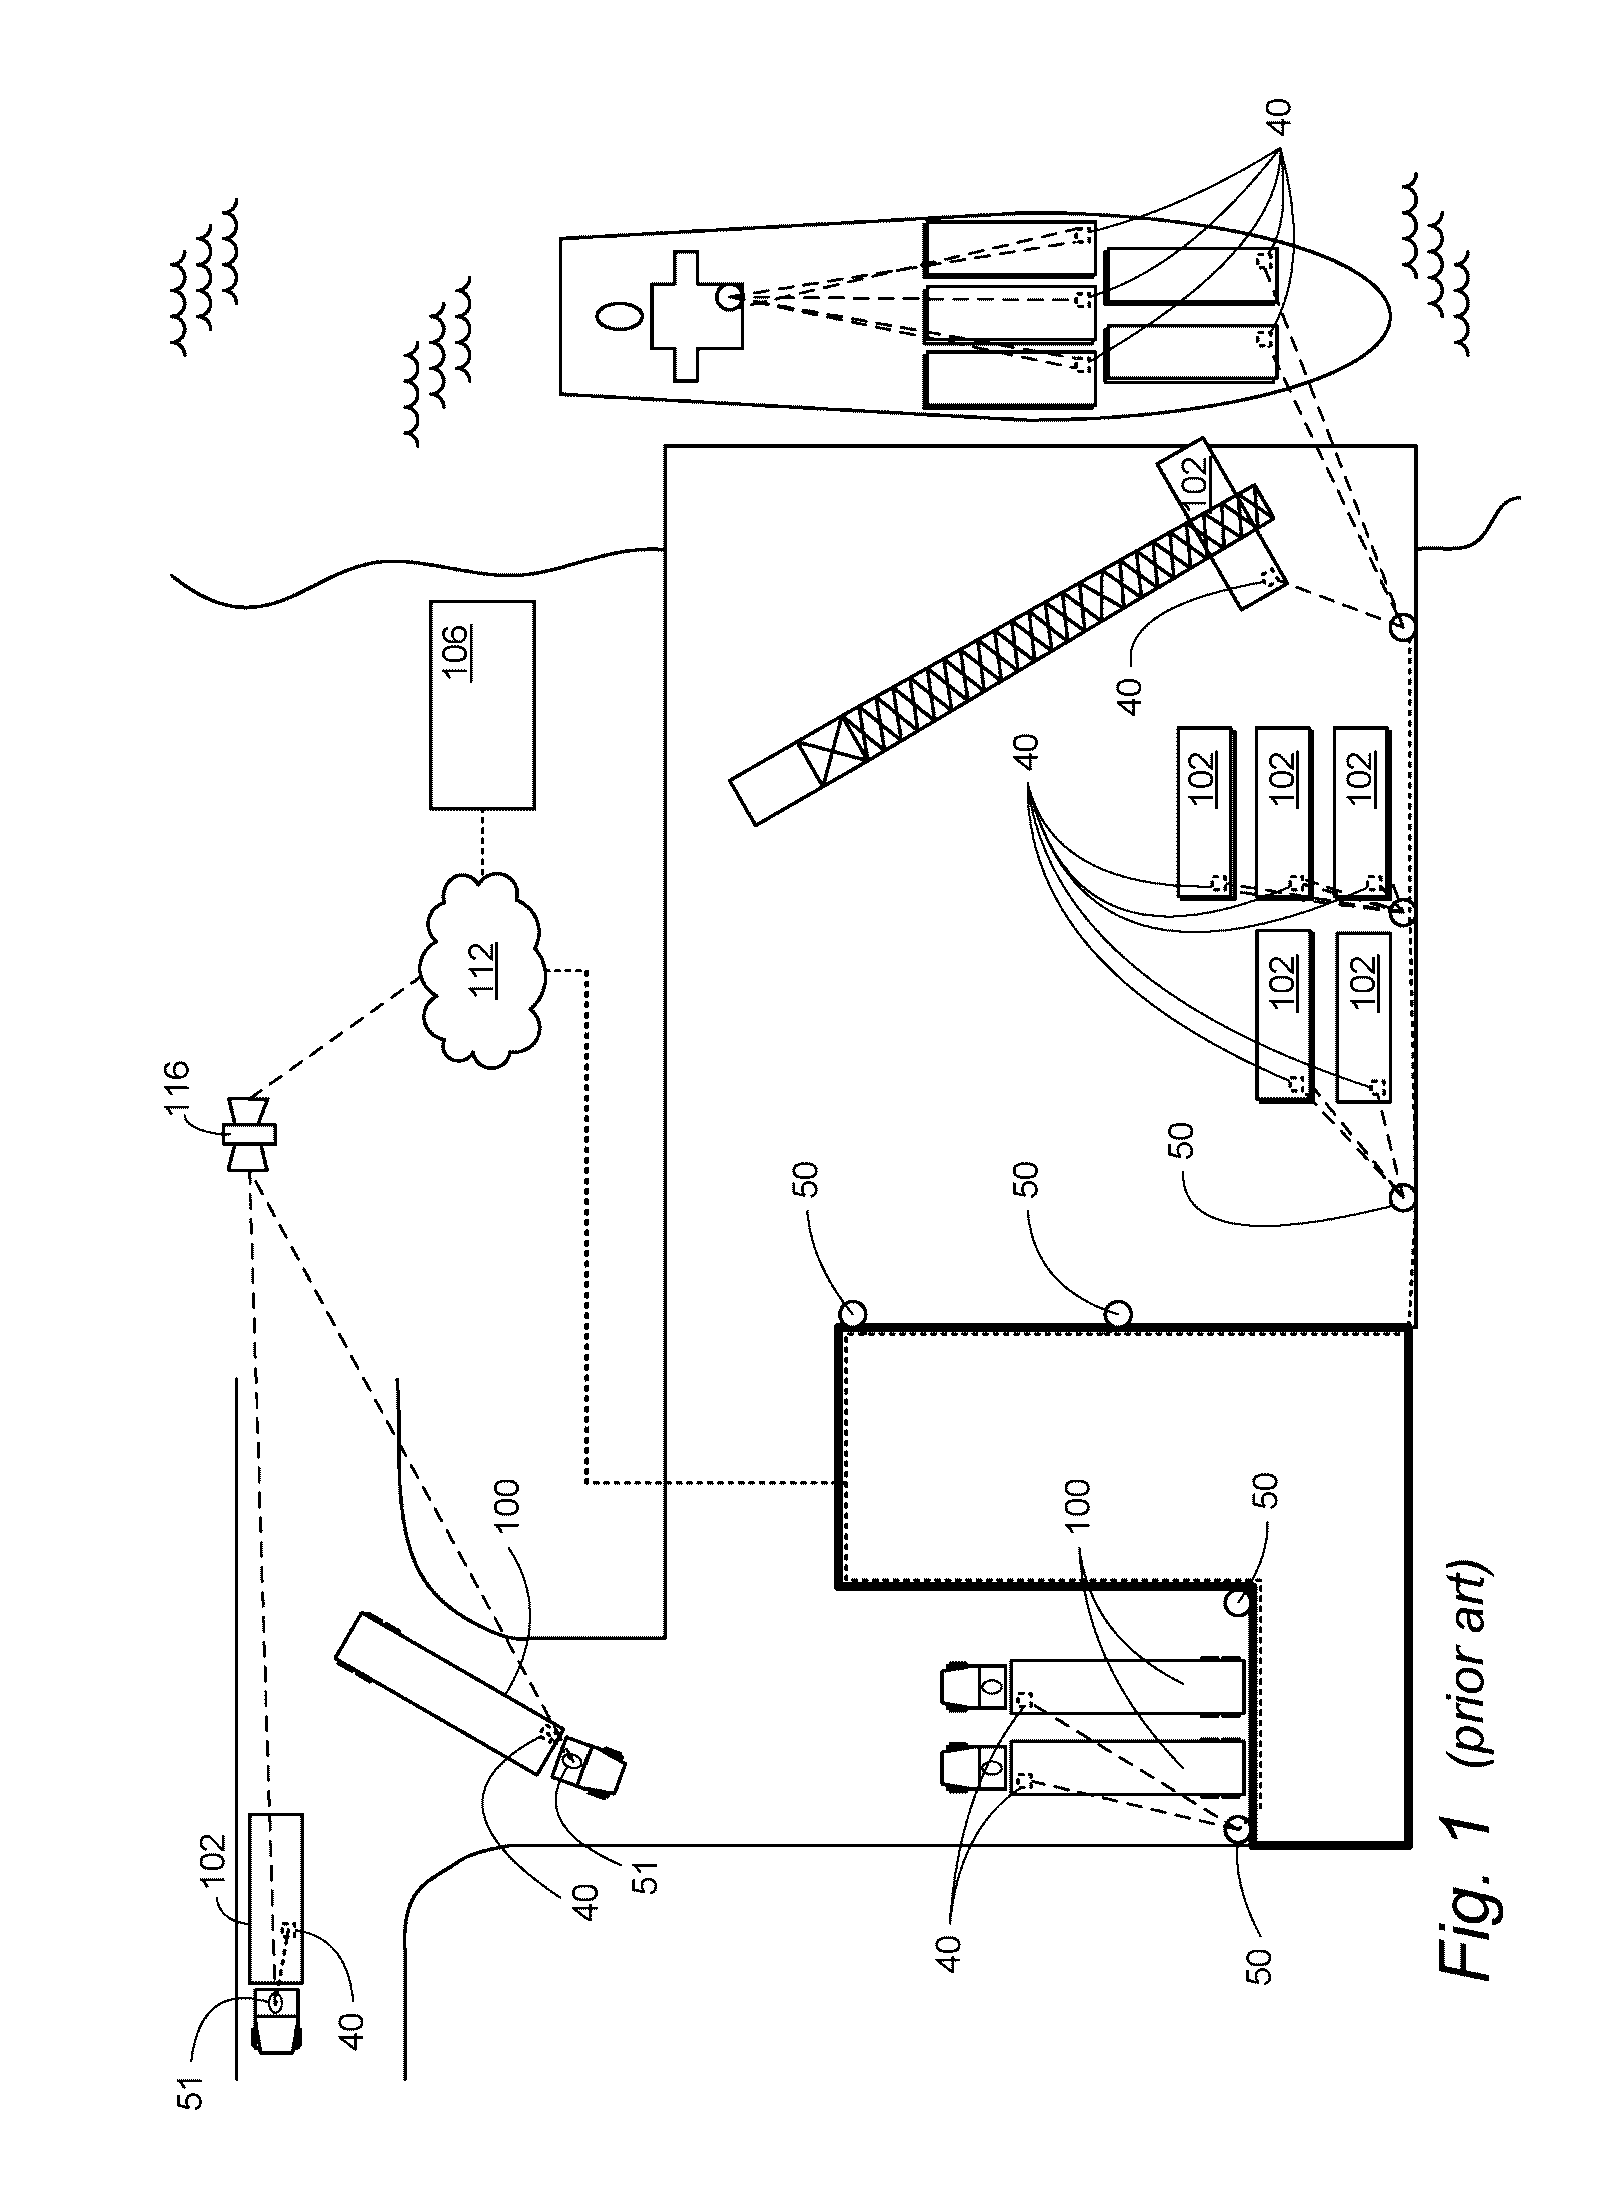 Keyhole communication device for tracking and monitoring shipping container and contents thereof